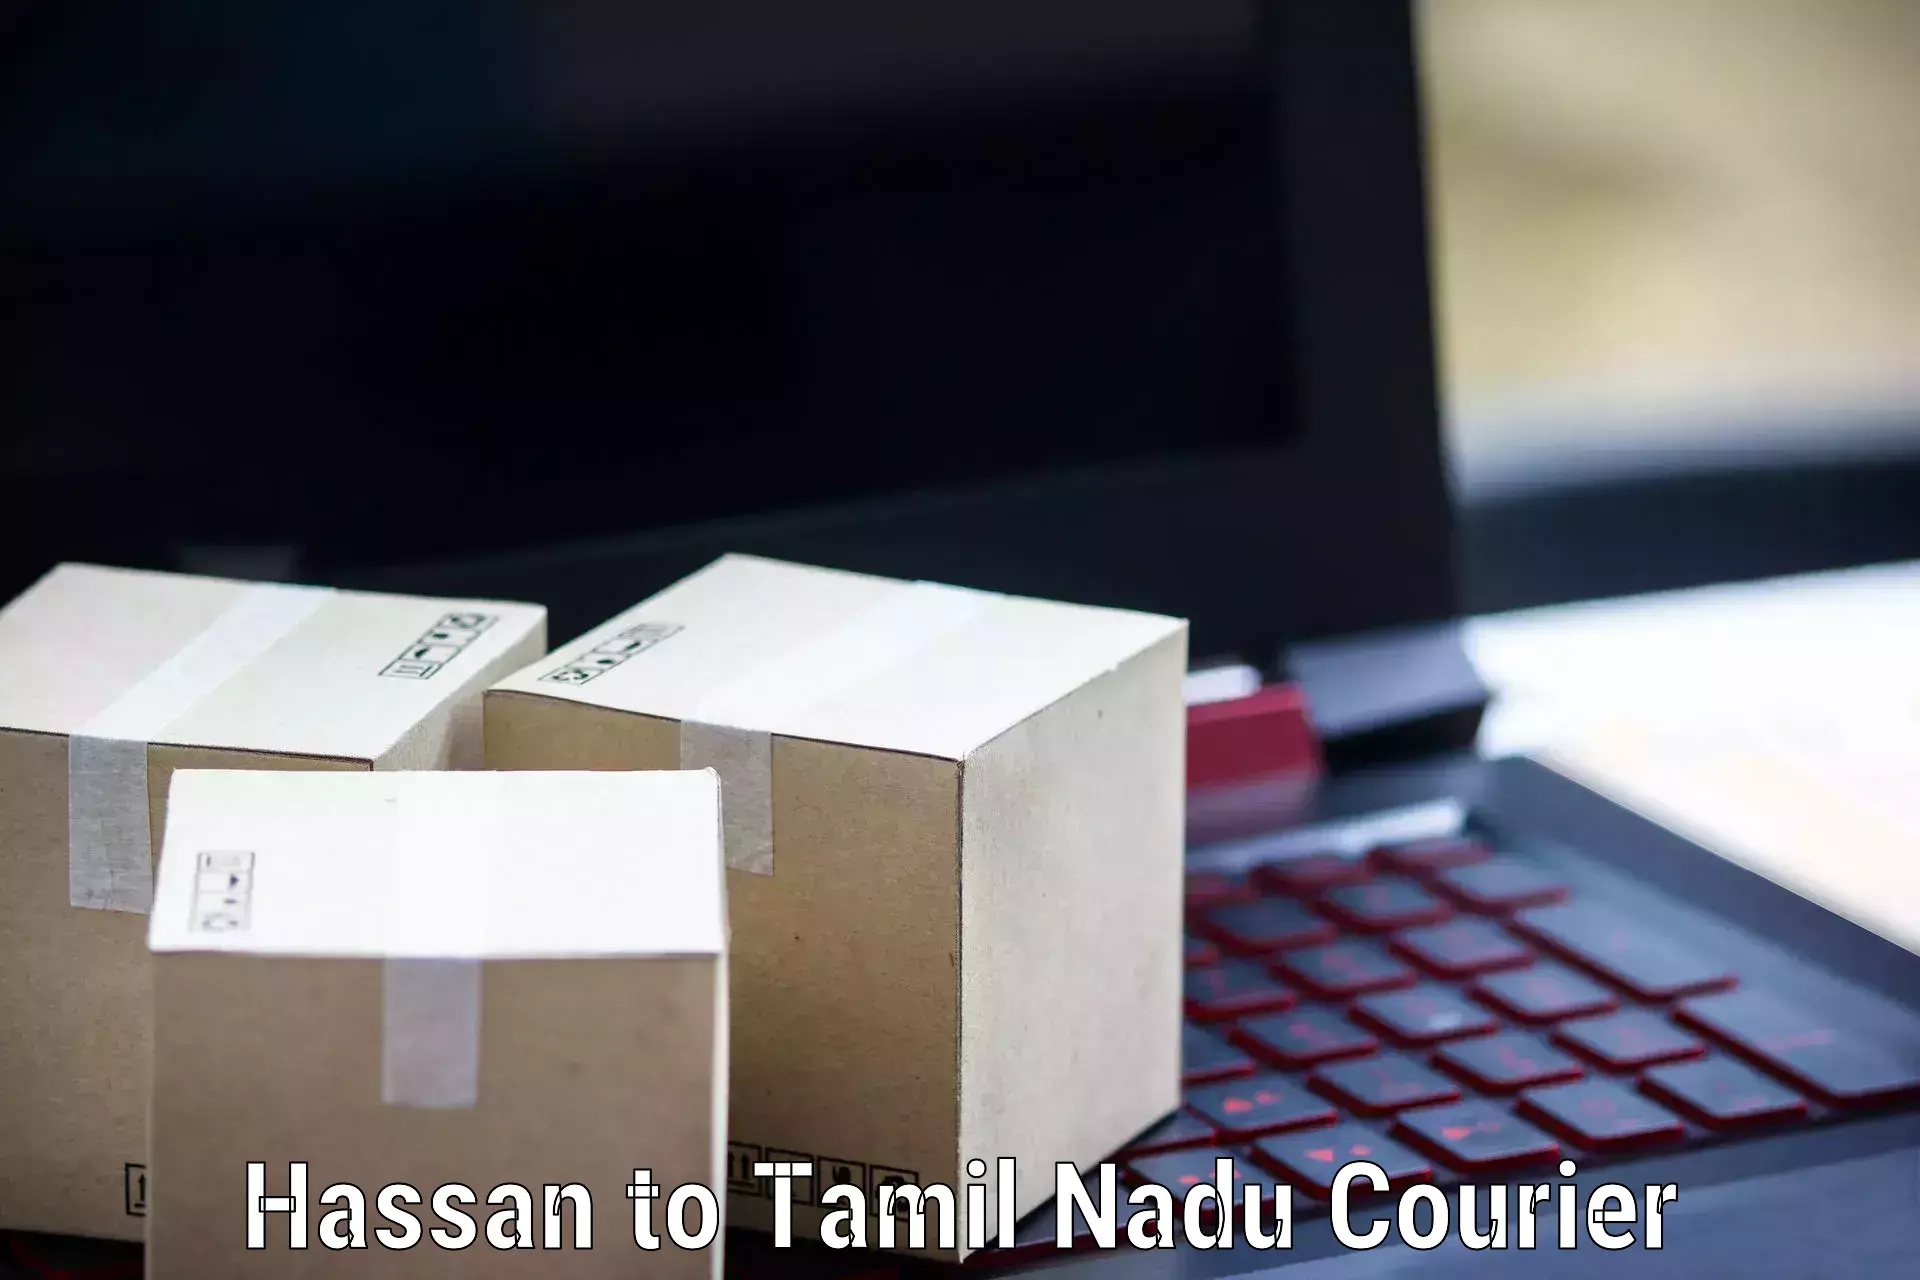 Express delivery network Hassan to Srirangam